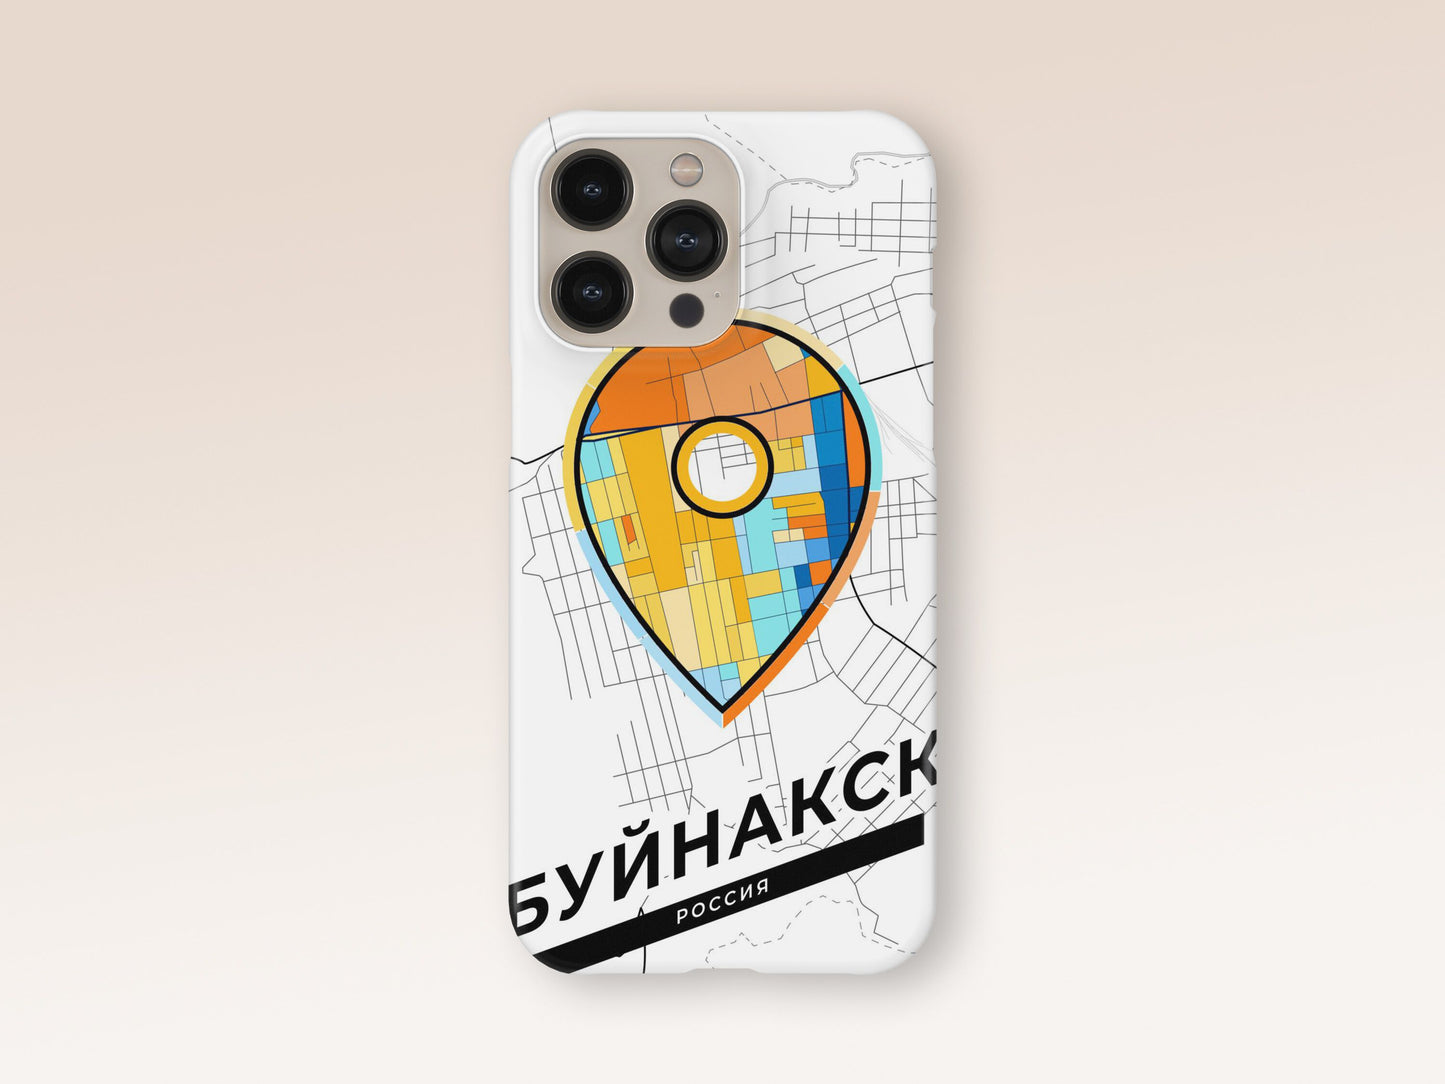 Buynaksk Russia slim phone case with colorful icon. Birthday, wedding or housewarming gift. Couple match cases. 1